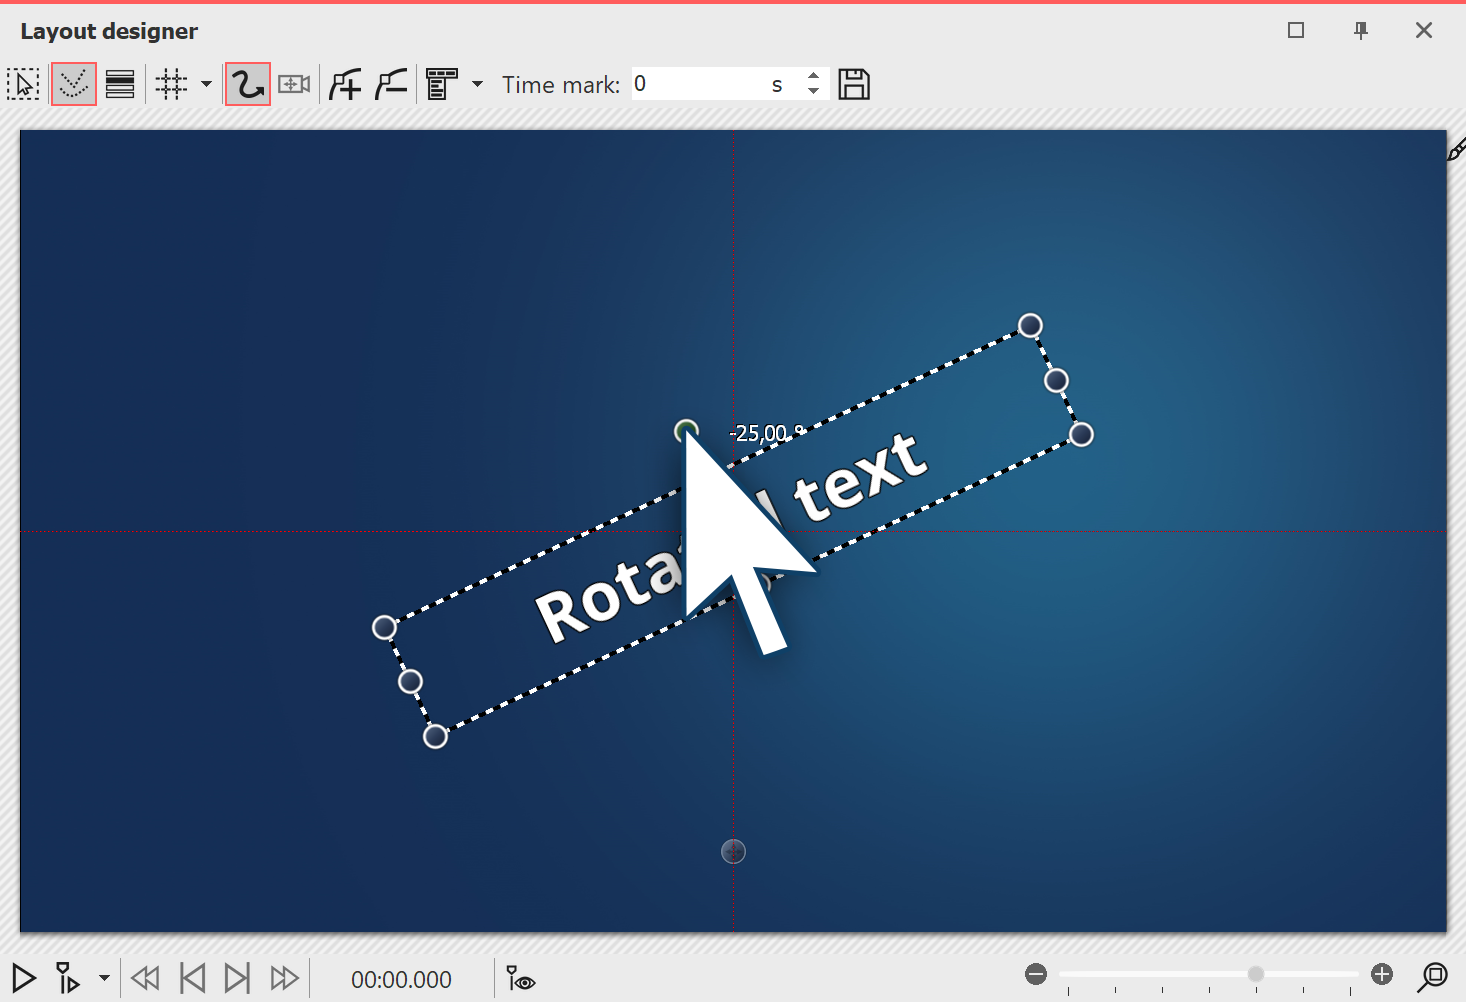 Rotate text in the Layout designer